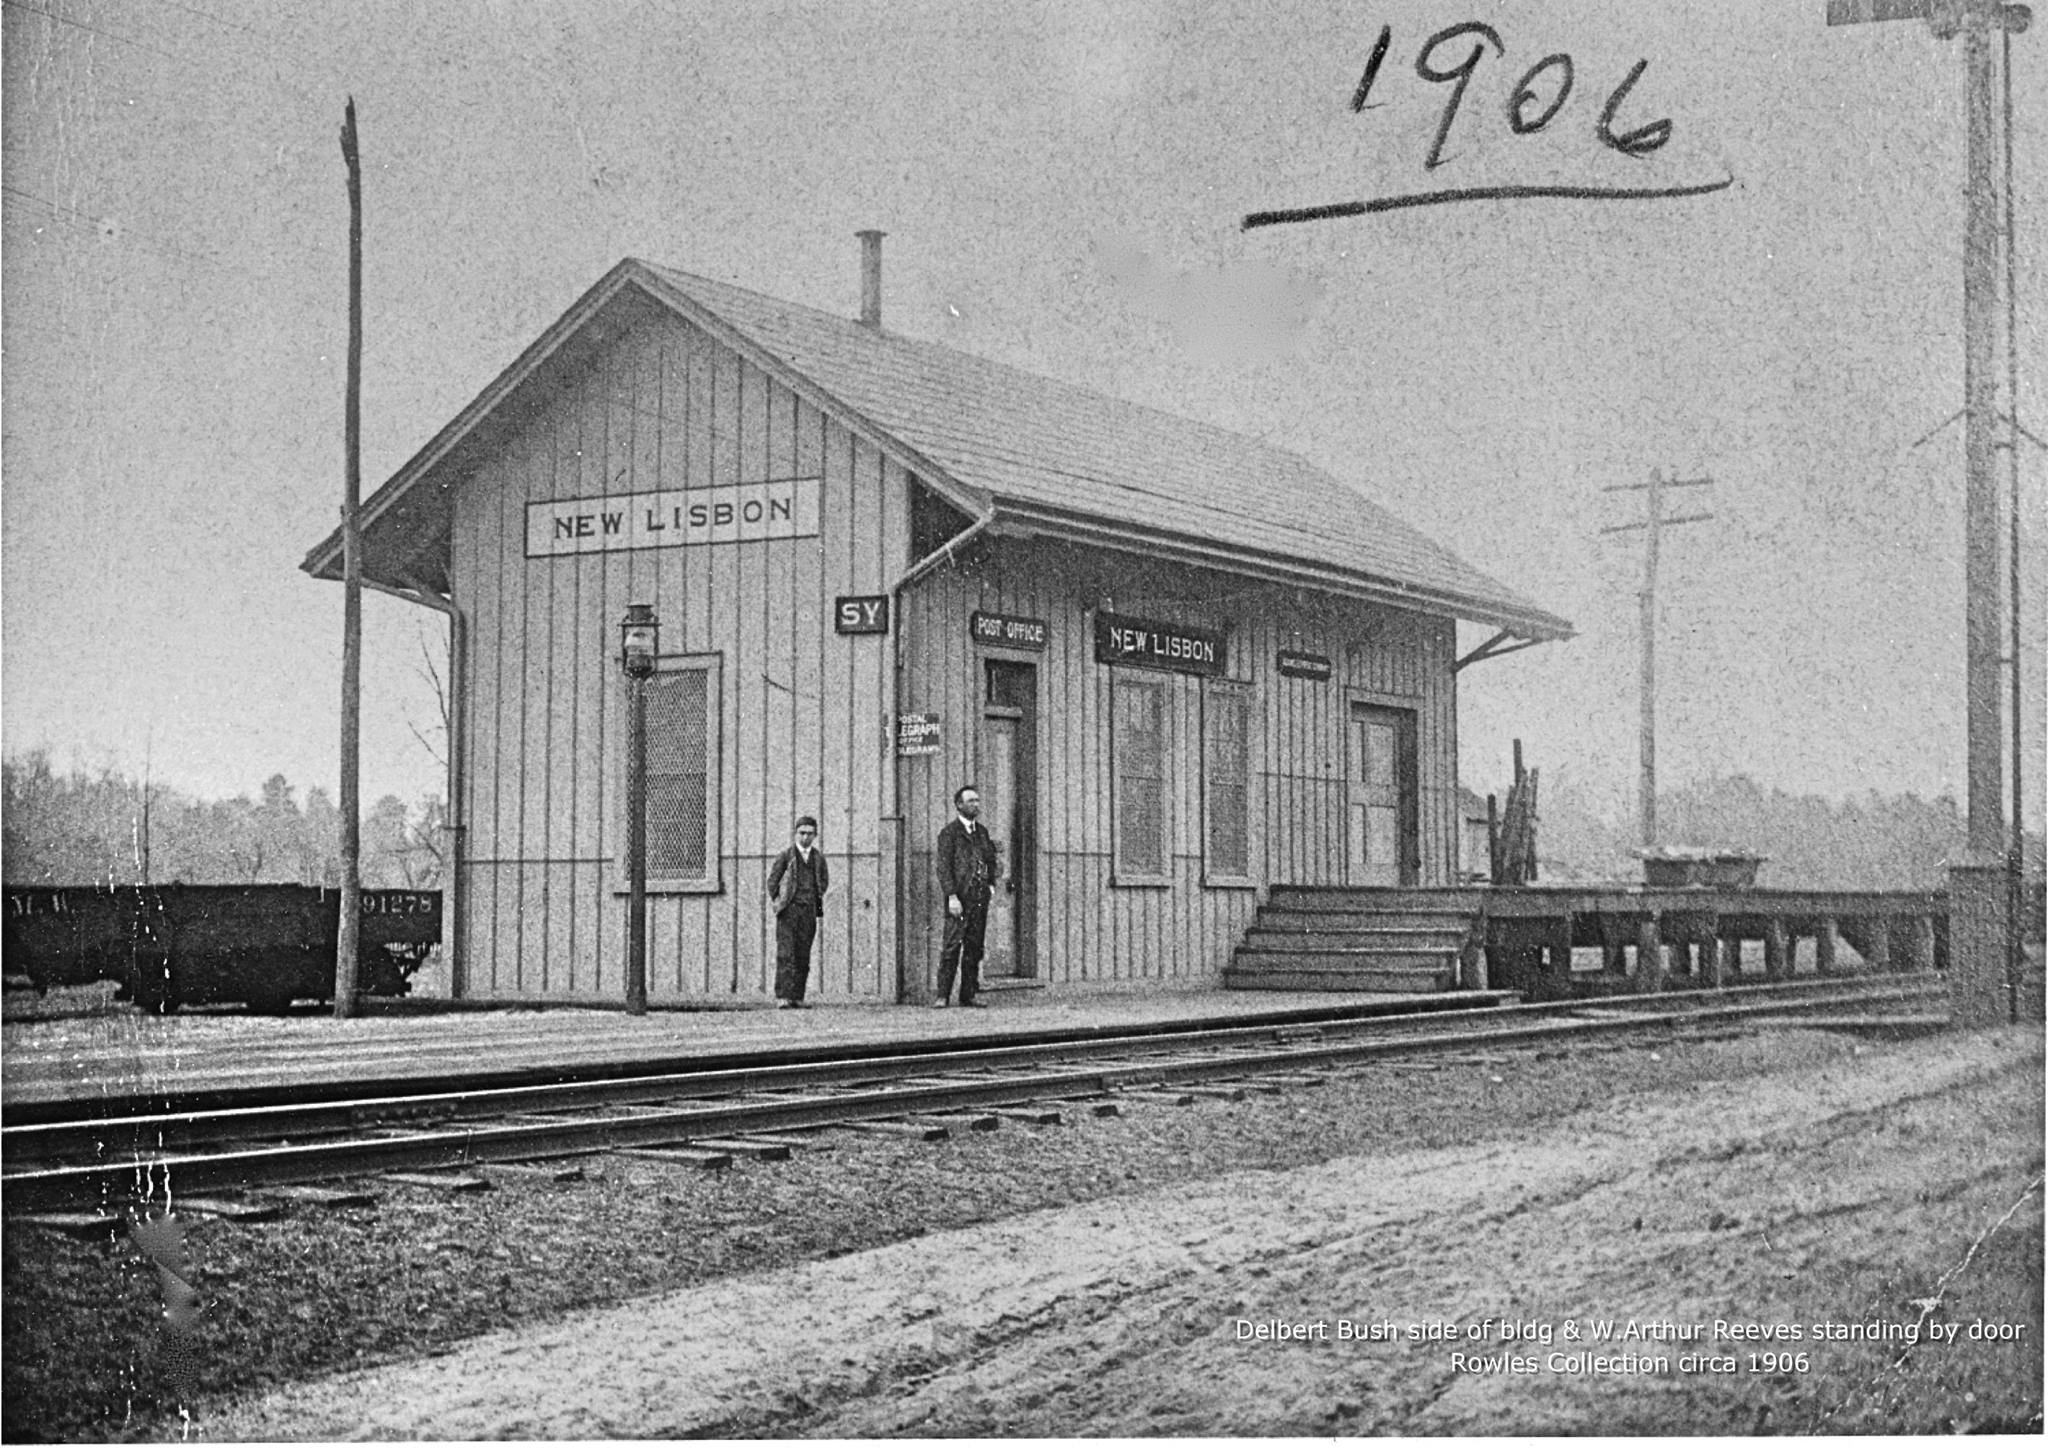 New Lisbon - Burlington County - New Lisbon Rail Road station, Post office and Postal Telegraph - Part of the PRR Birmingham Branch - Delbert Bush smaller man on side and W Arthur Reeves standing by the door - c 1906 - Alan Rowles